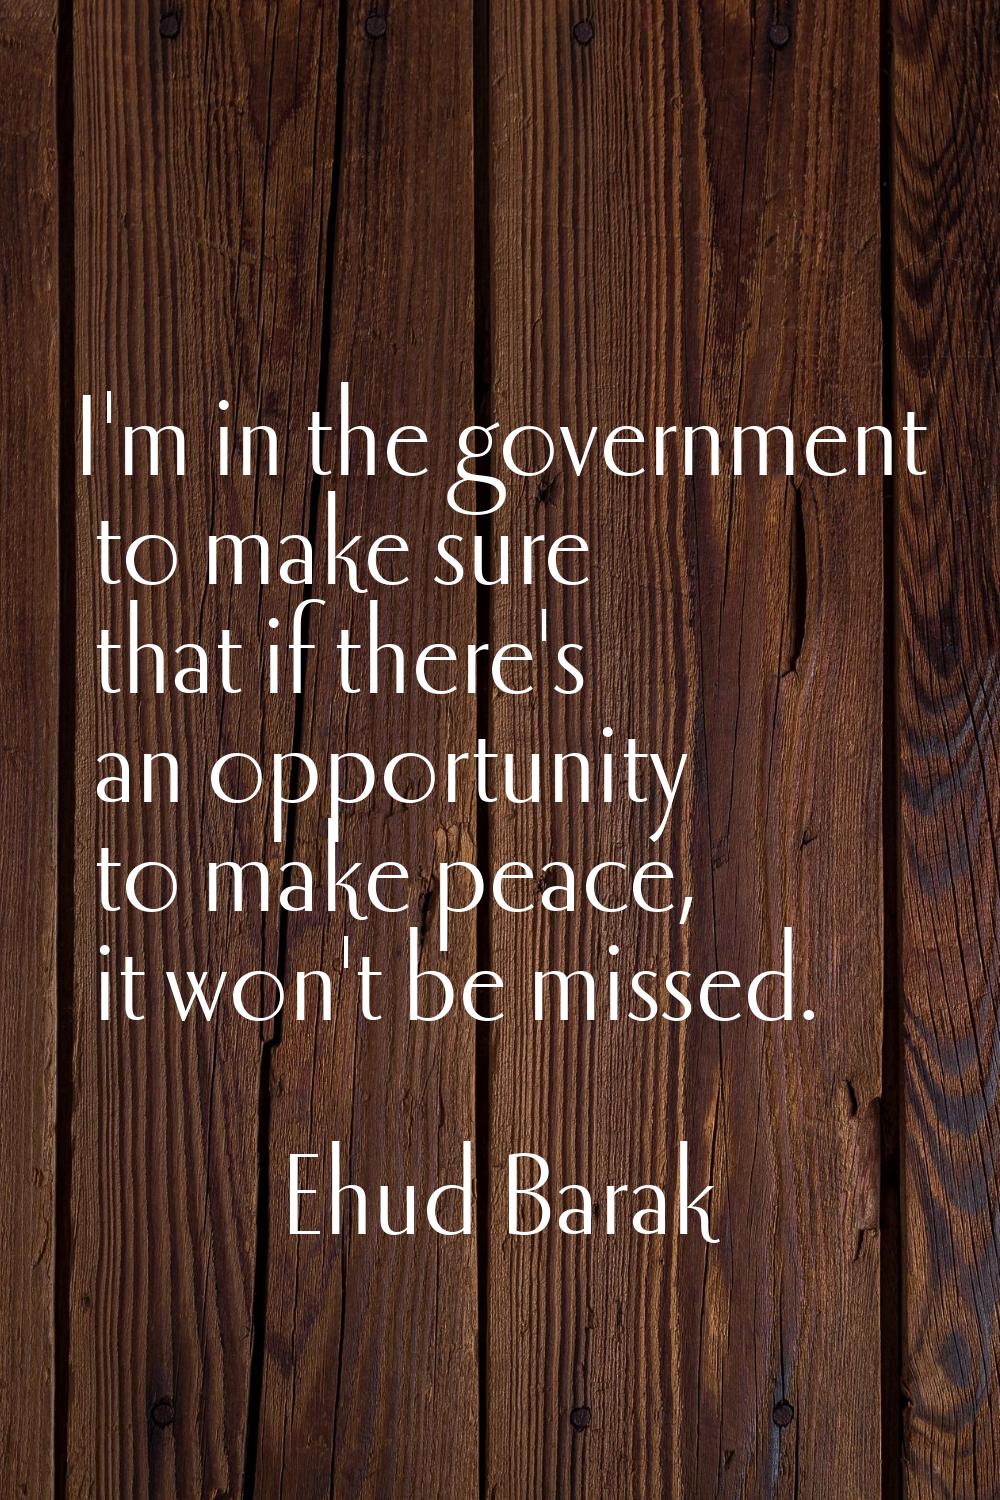 I'm in the government to make sure that if there's an opportunity to make peace, it won't be missed